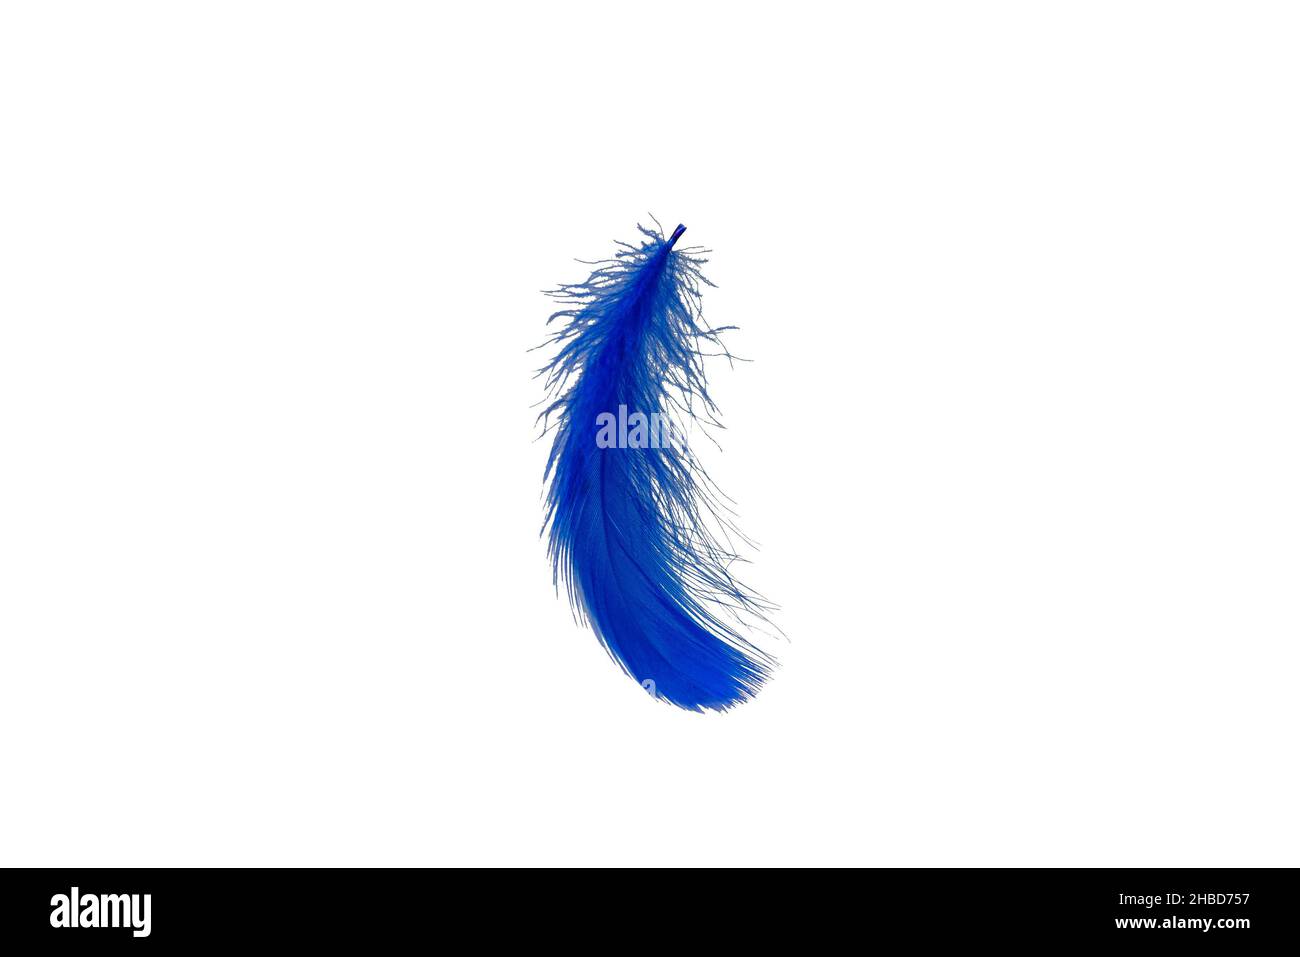 Blue feather isolated on a white background. Stock Photo